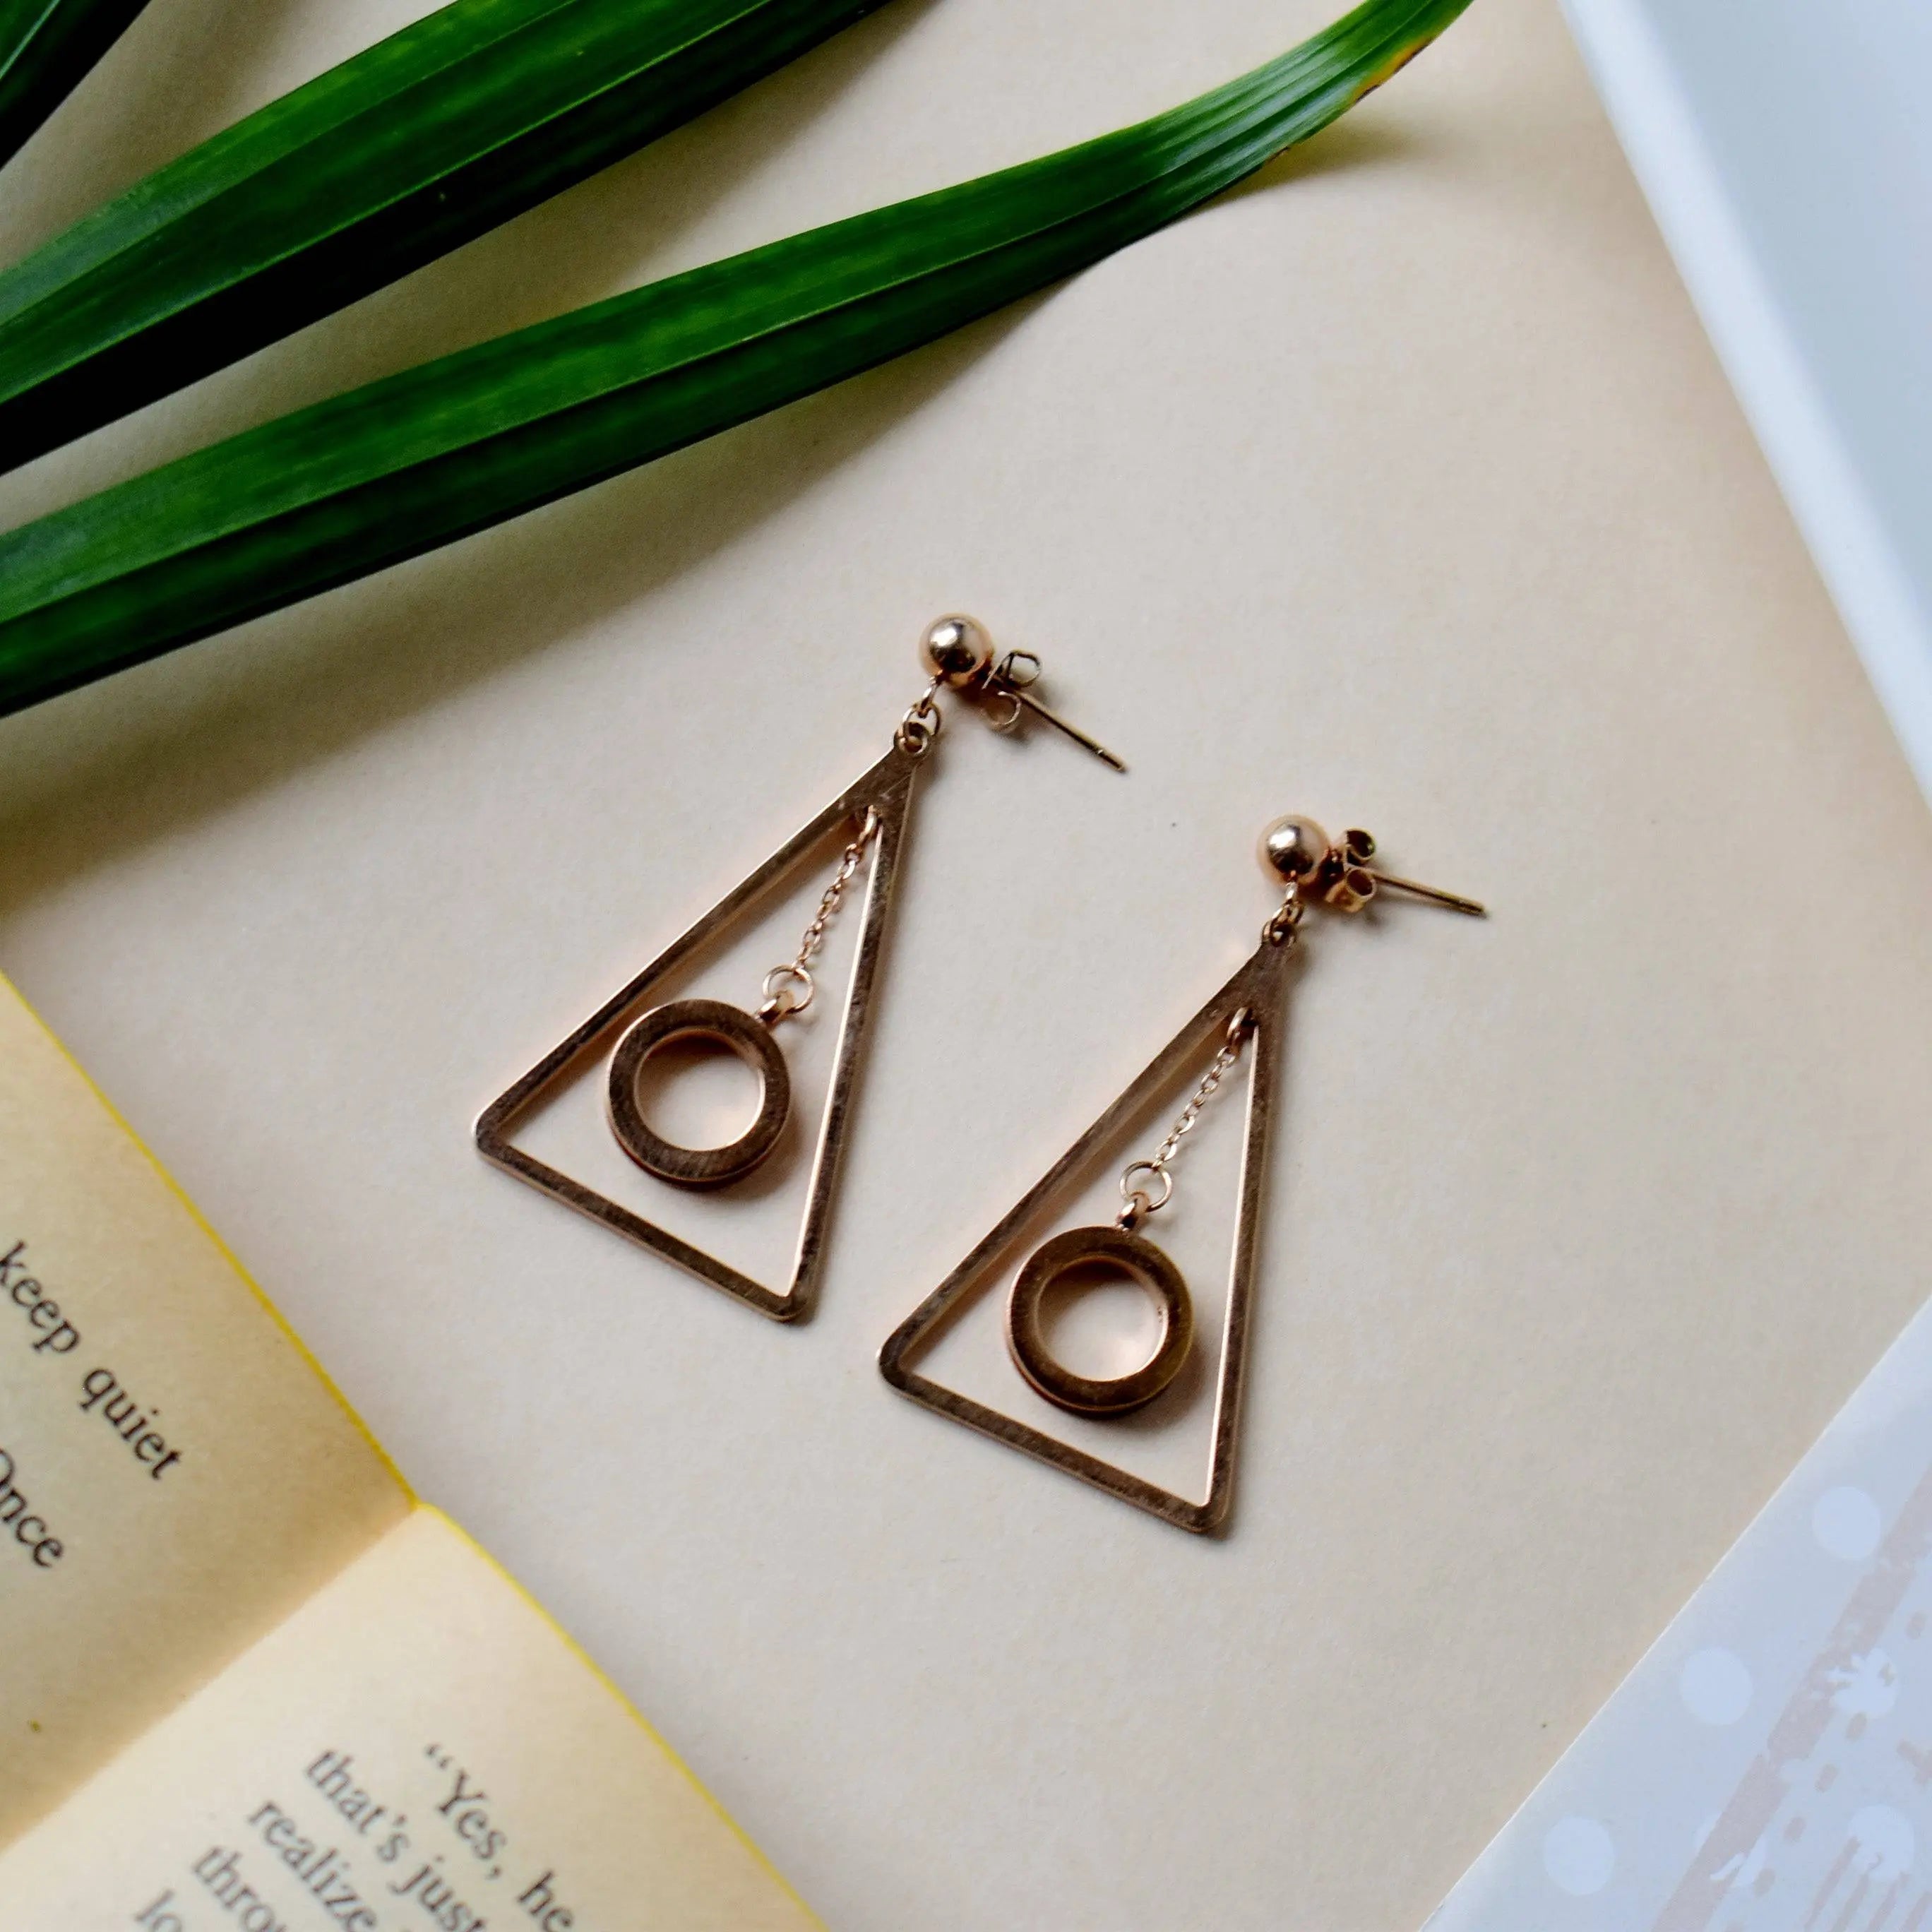 Hermione Granger ™ Yule Ball Earrings at noblecollection.com